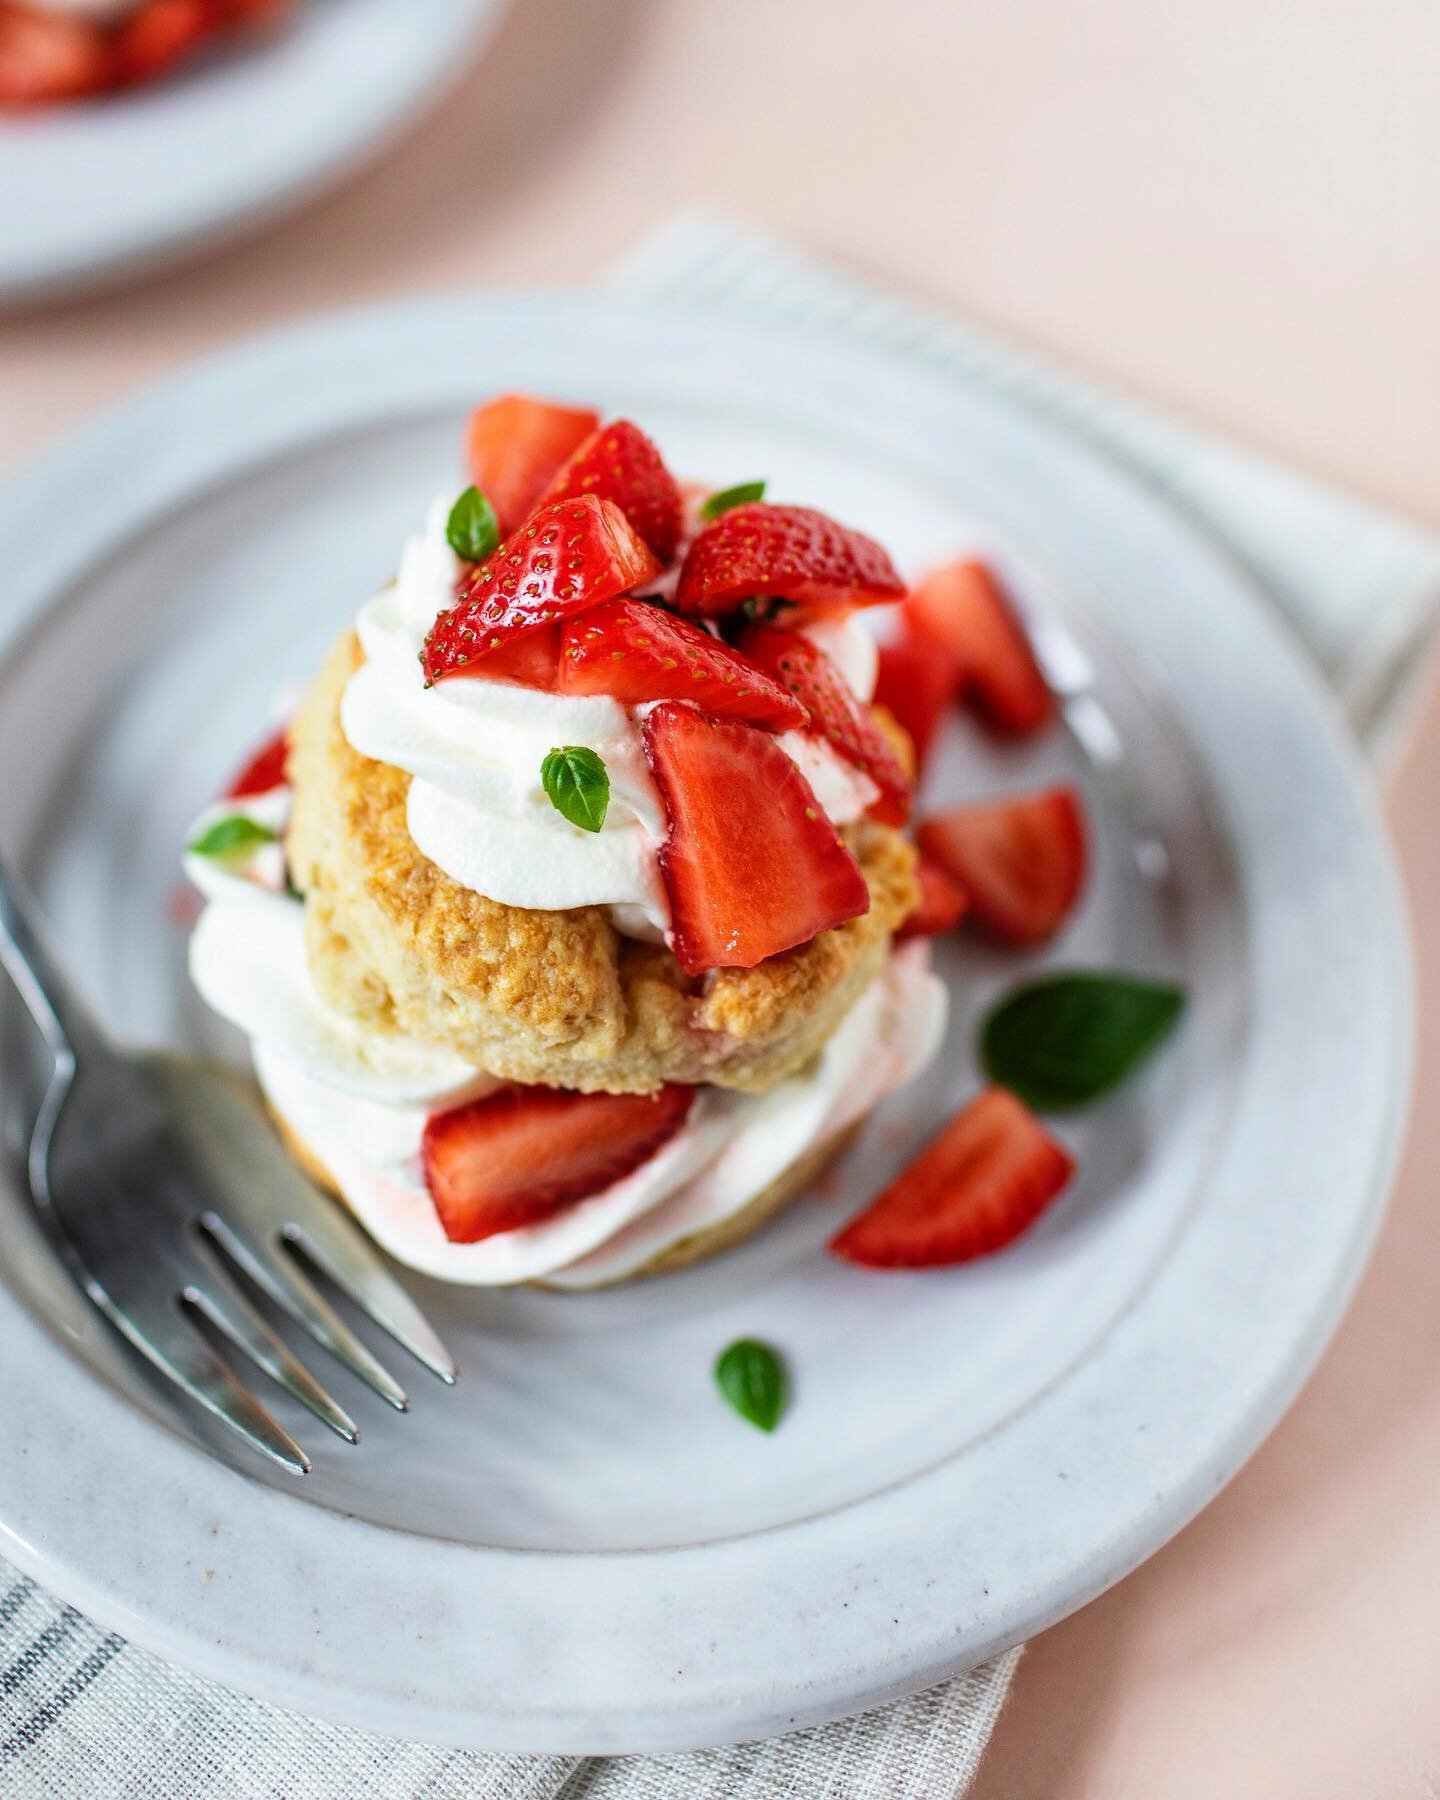 strawberry shortcakes with a summery basil twist ft. @bobsredmill all-purpose flour! a wonderful dessert to make ahead of time &amp; assemble just before serving. find the full recipe at the link in profile! 🍓🍓🍓 #bobsredmill